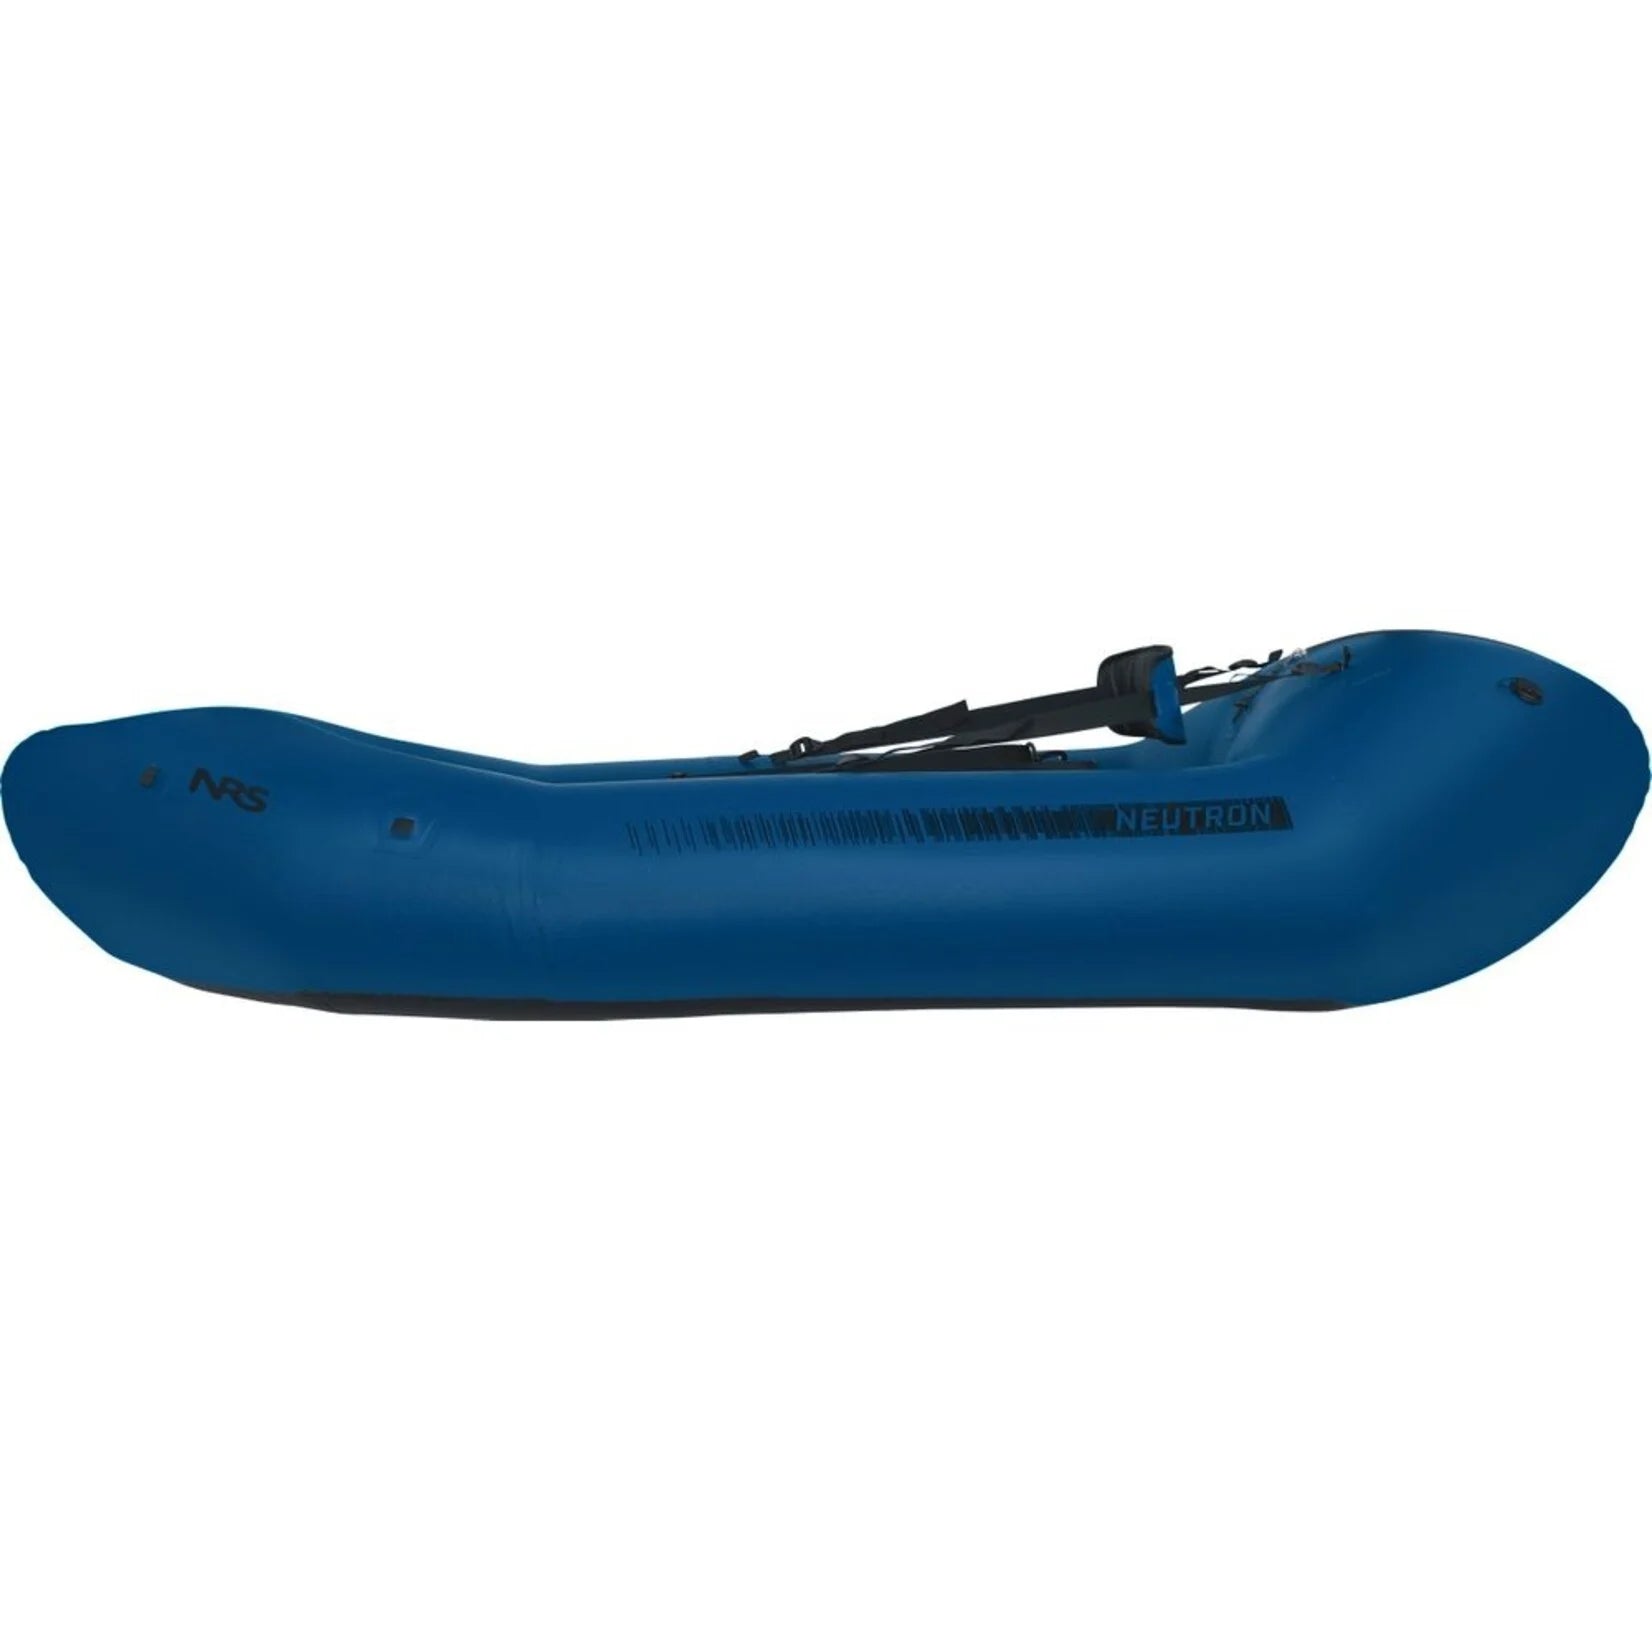 An NRS Neutron Packraft, blue in color, set against a white background.